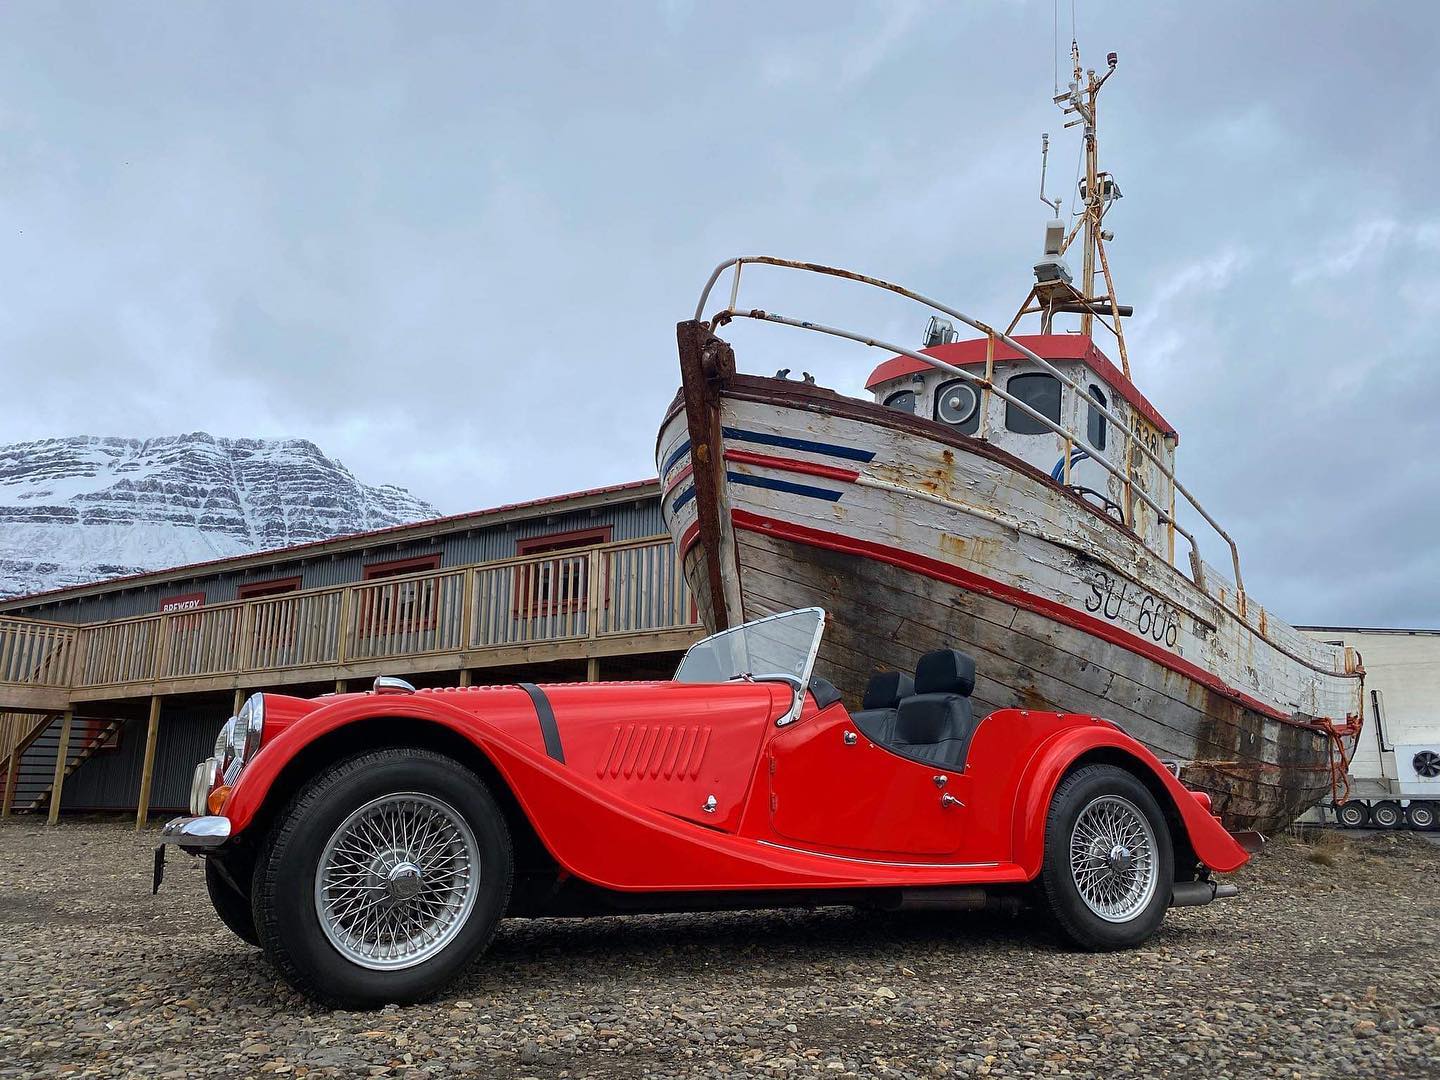 A bright red vintage car in front of an old boat